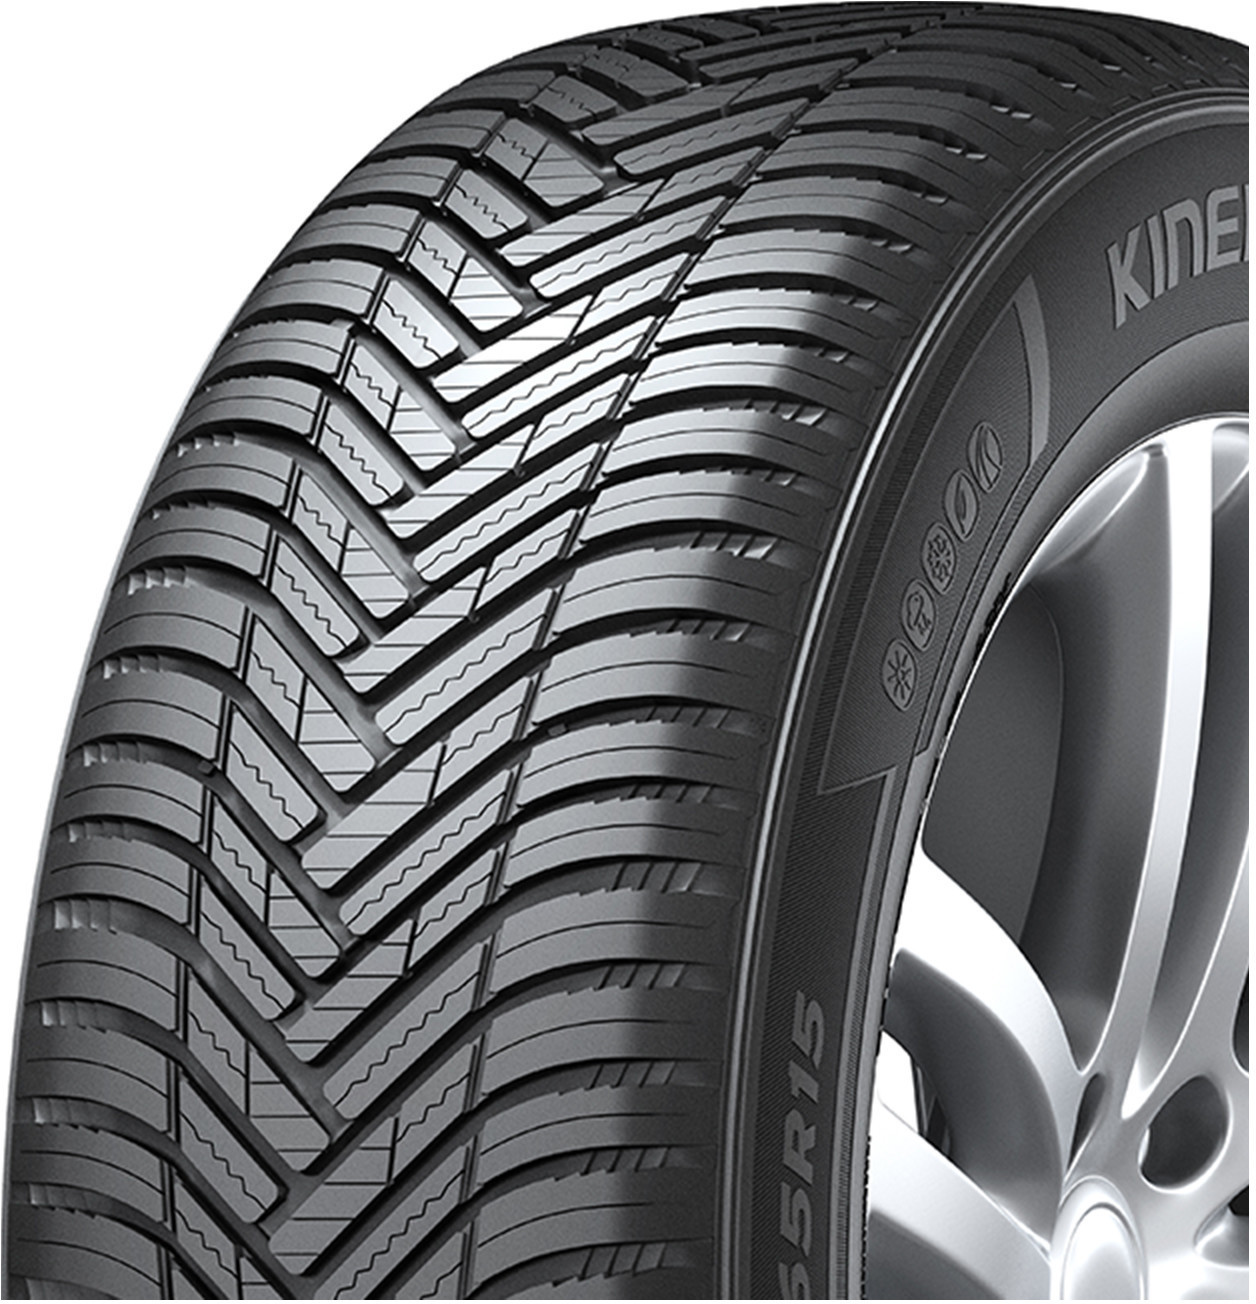 hankook-dynapro-mt2-rt05-tire-reviews-ratings-simpletire